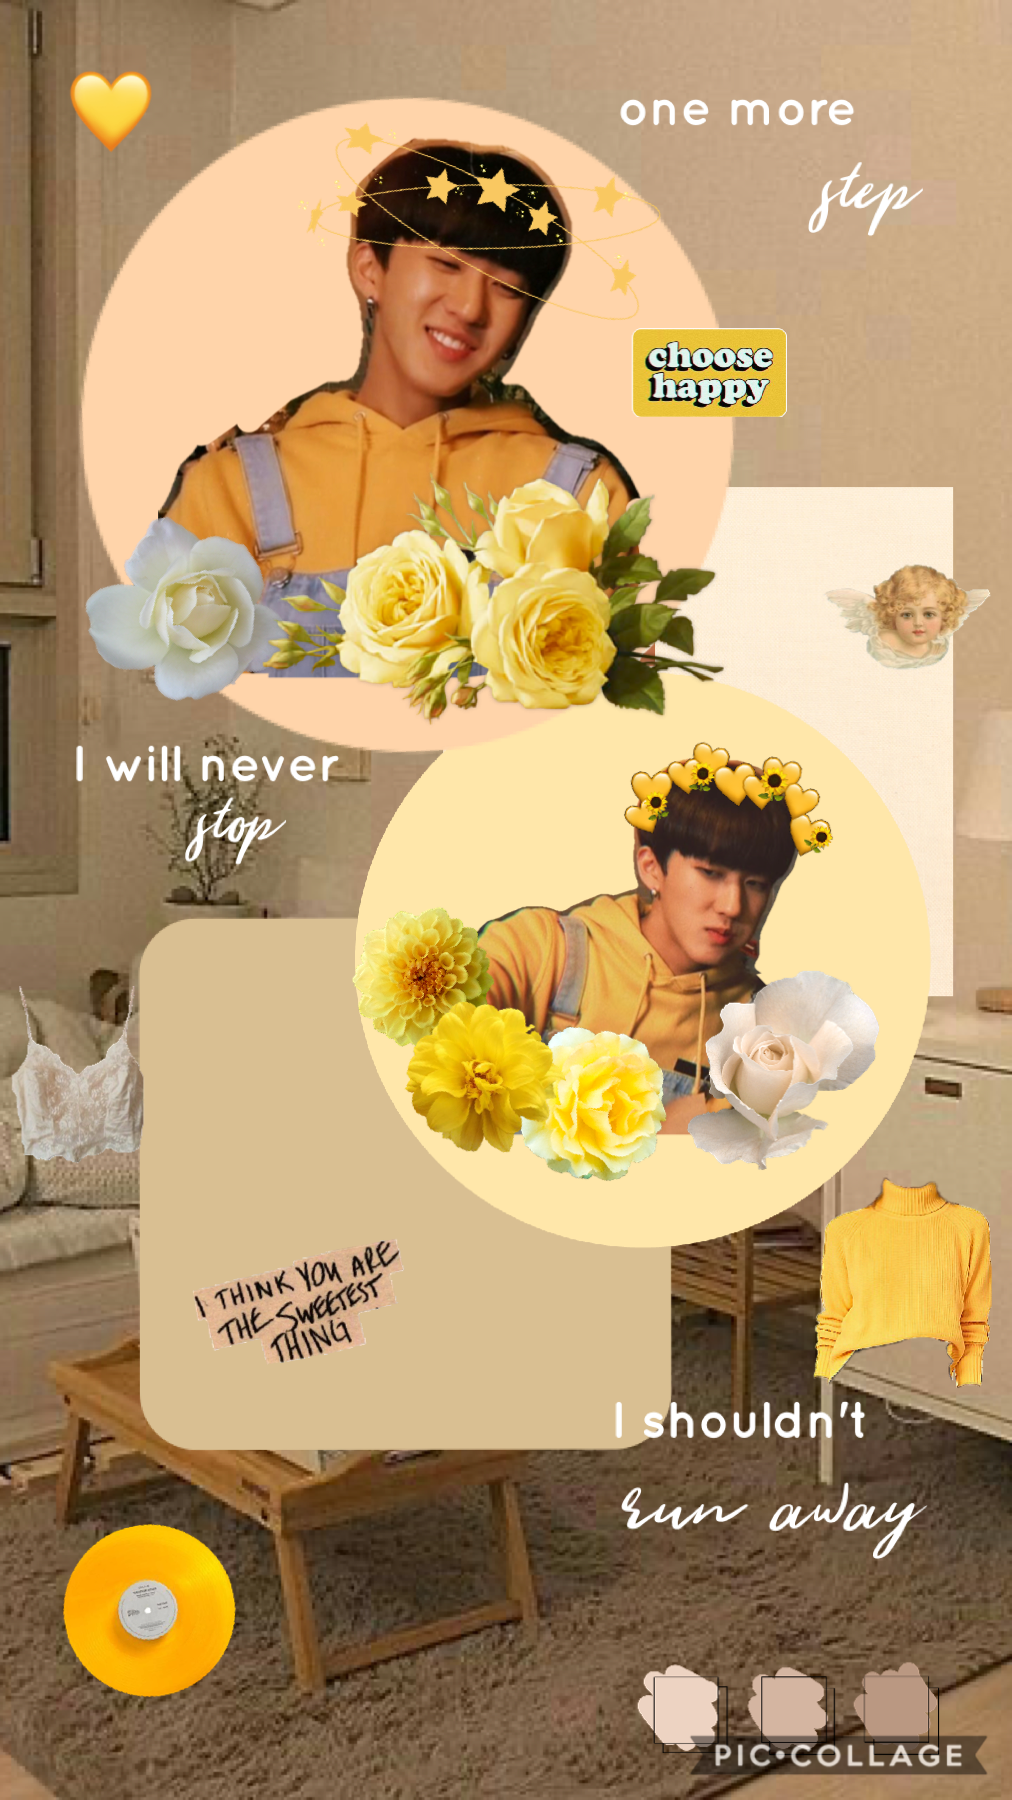 ~ h e l l o ~ 
this is random, but here! 
It's binnie 
i lob him sm
i'm not okay ahaha
use this as a wallpaper if you'd like
probably gonna turn into a wallpaper acc ngl
~ p e a c e ~
✌🏻